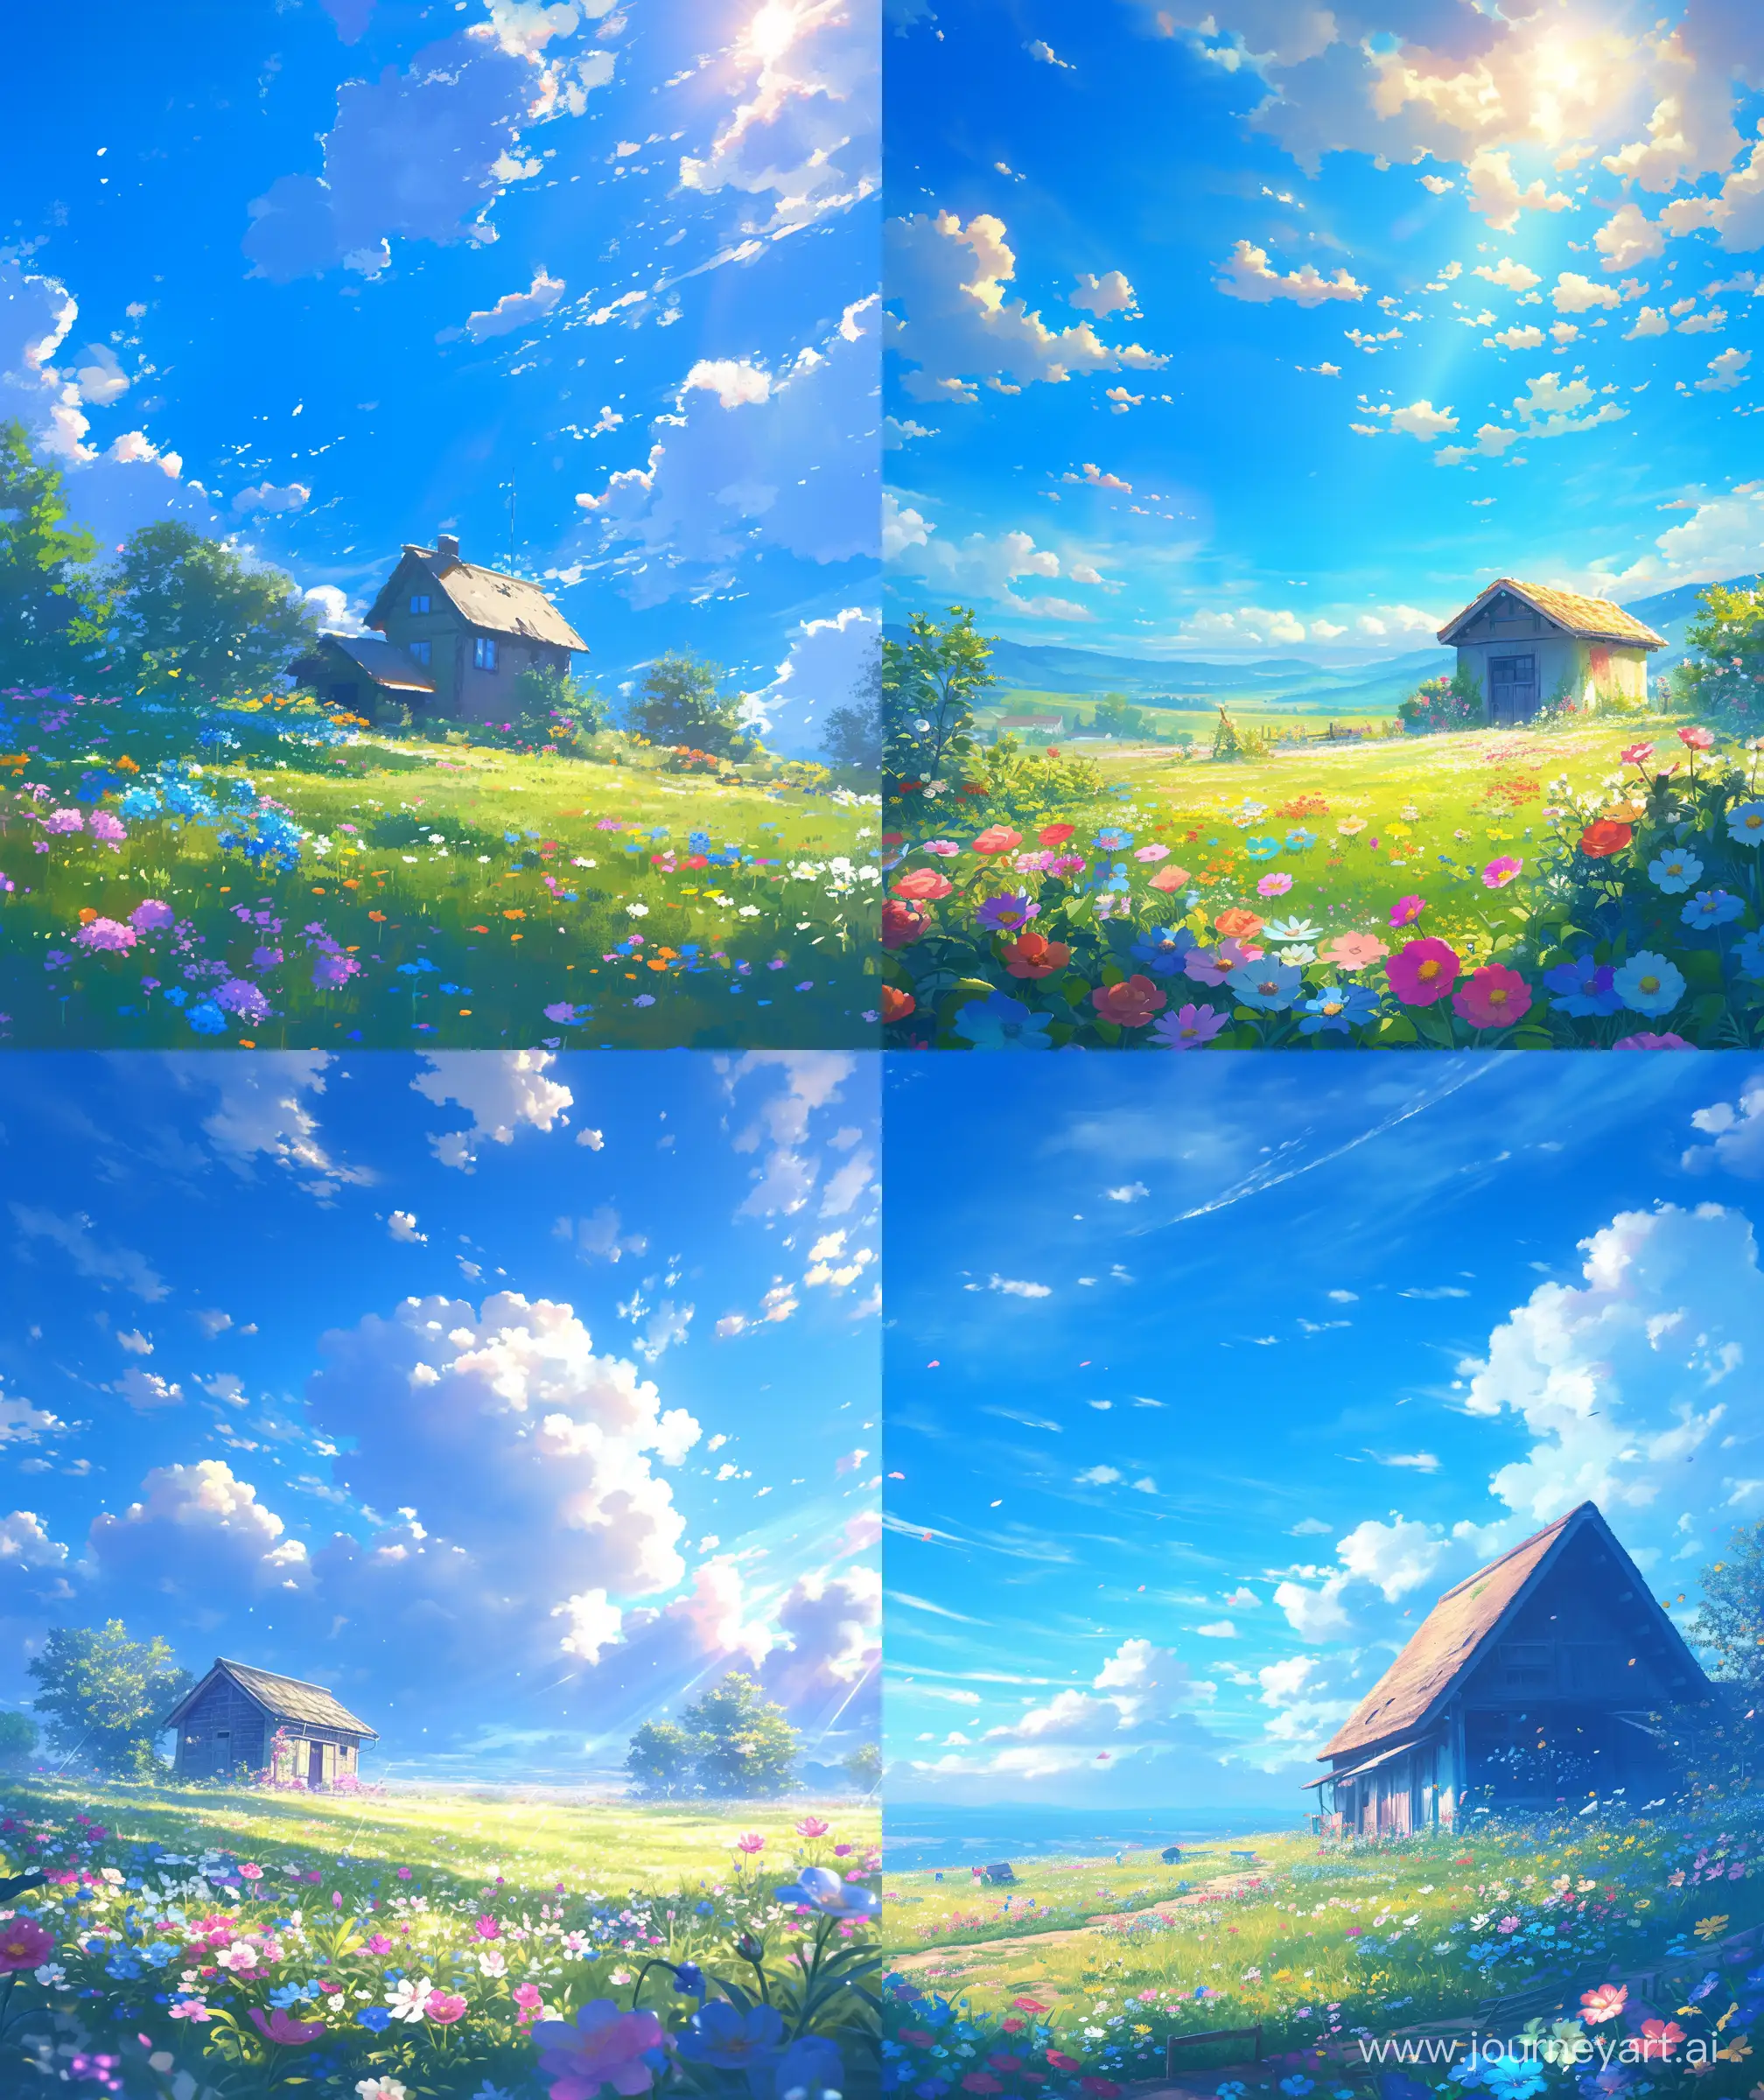 Scenic-Makoto-ShinkaiInspired-Cottage-with-Flowers-under-a-Beautiful-Blue-Sky